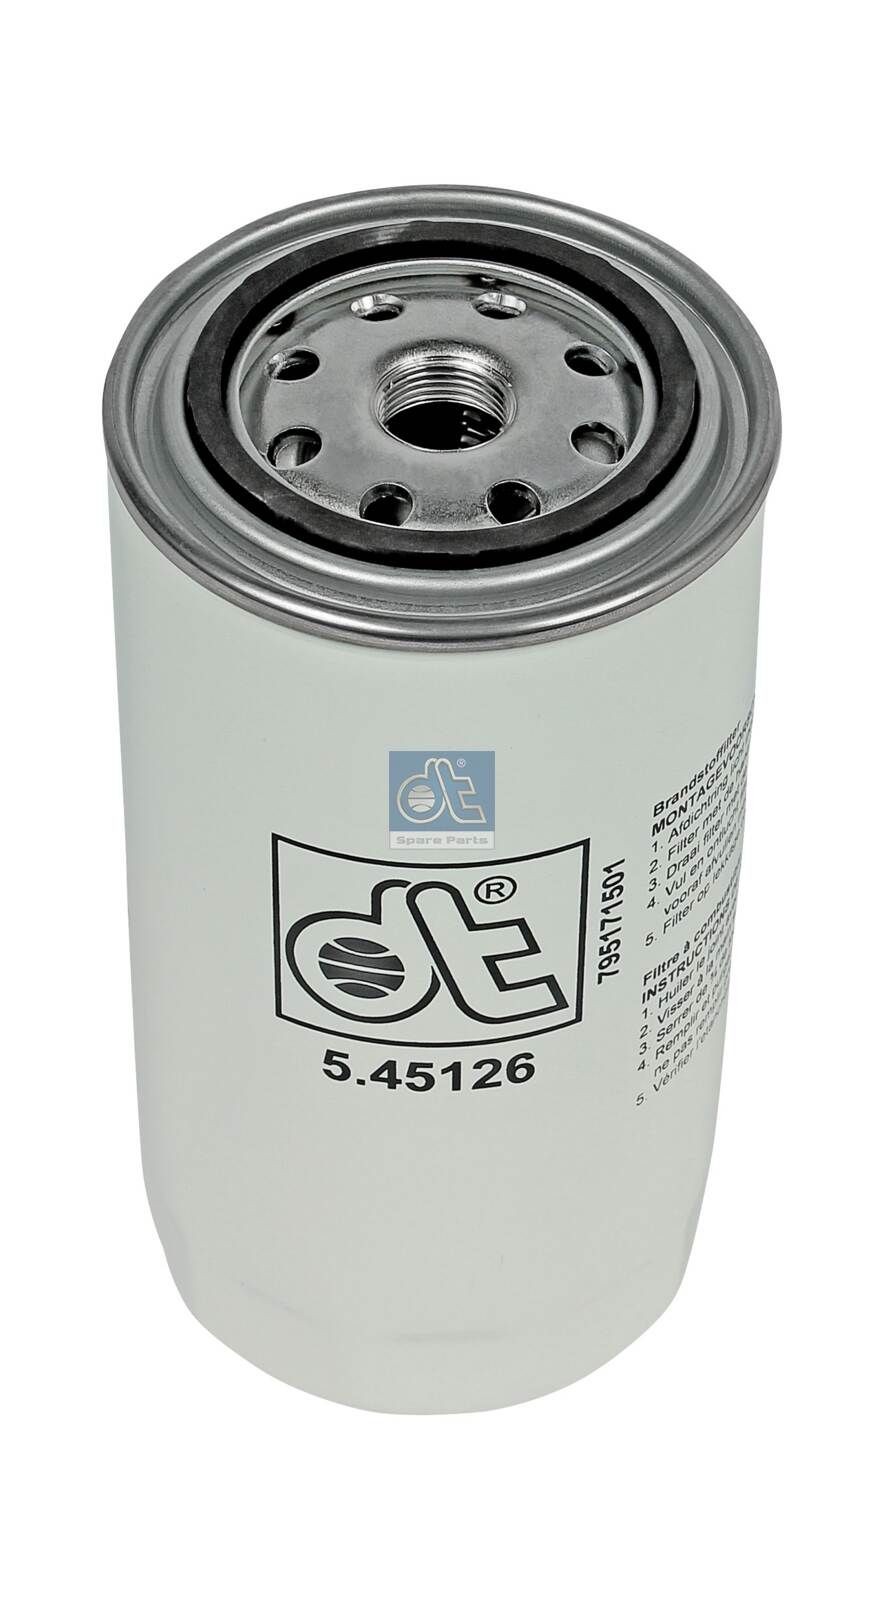 WK 950/21 DT Spare Parts 5.45126 Fuel filter 504043765